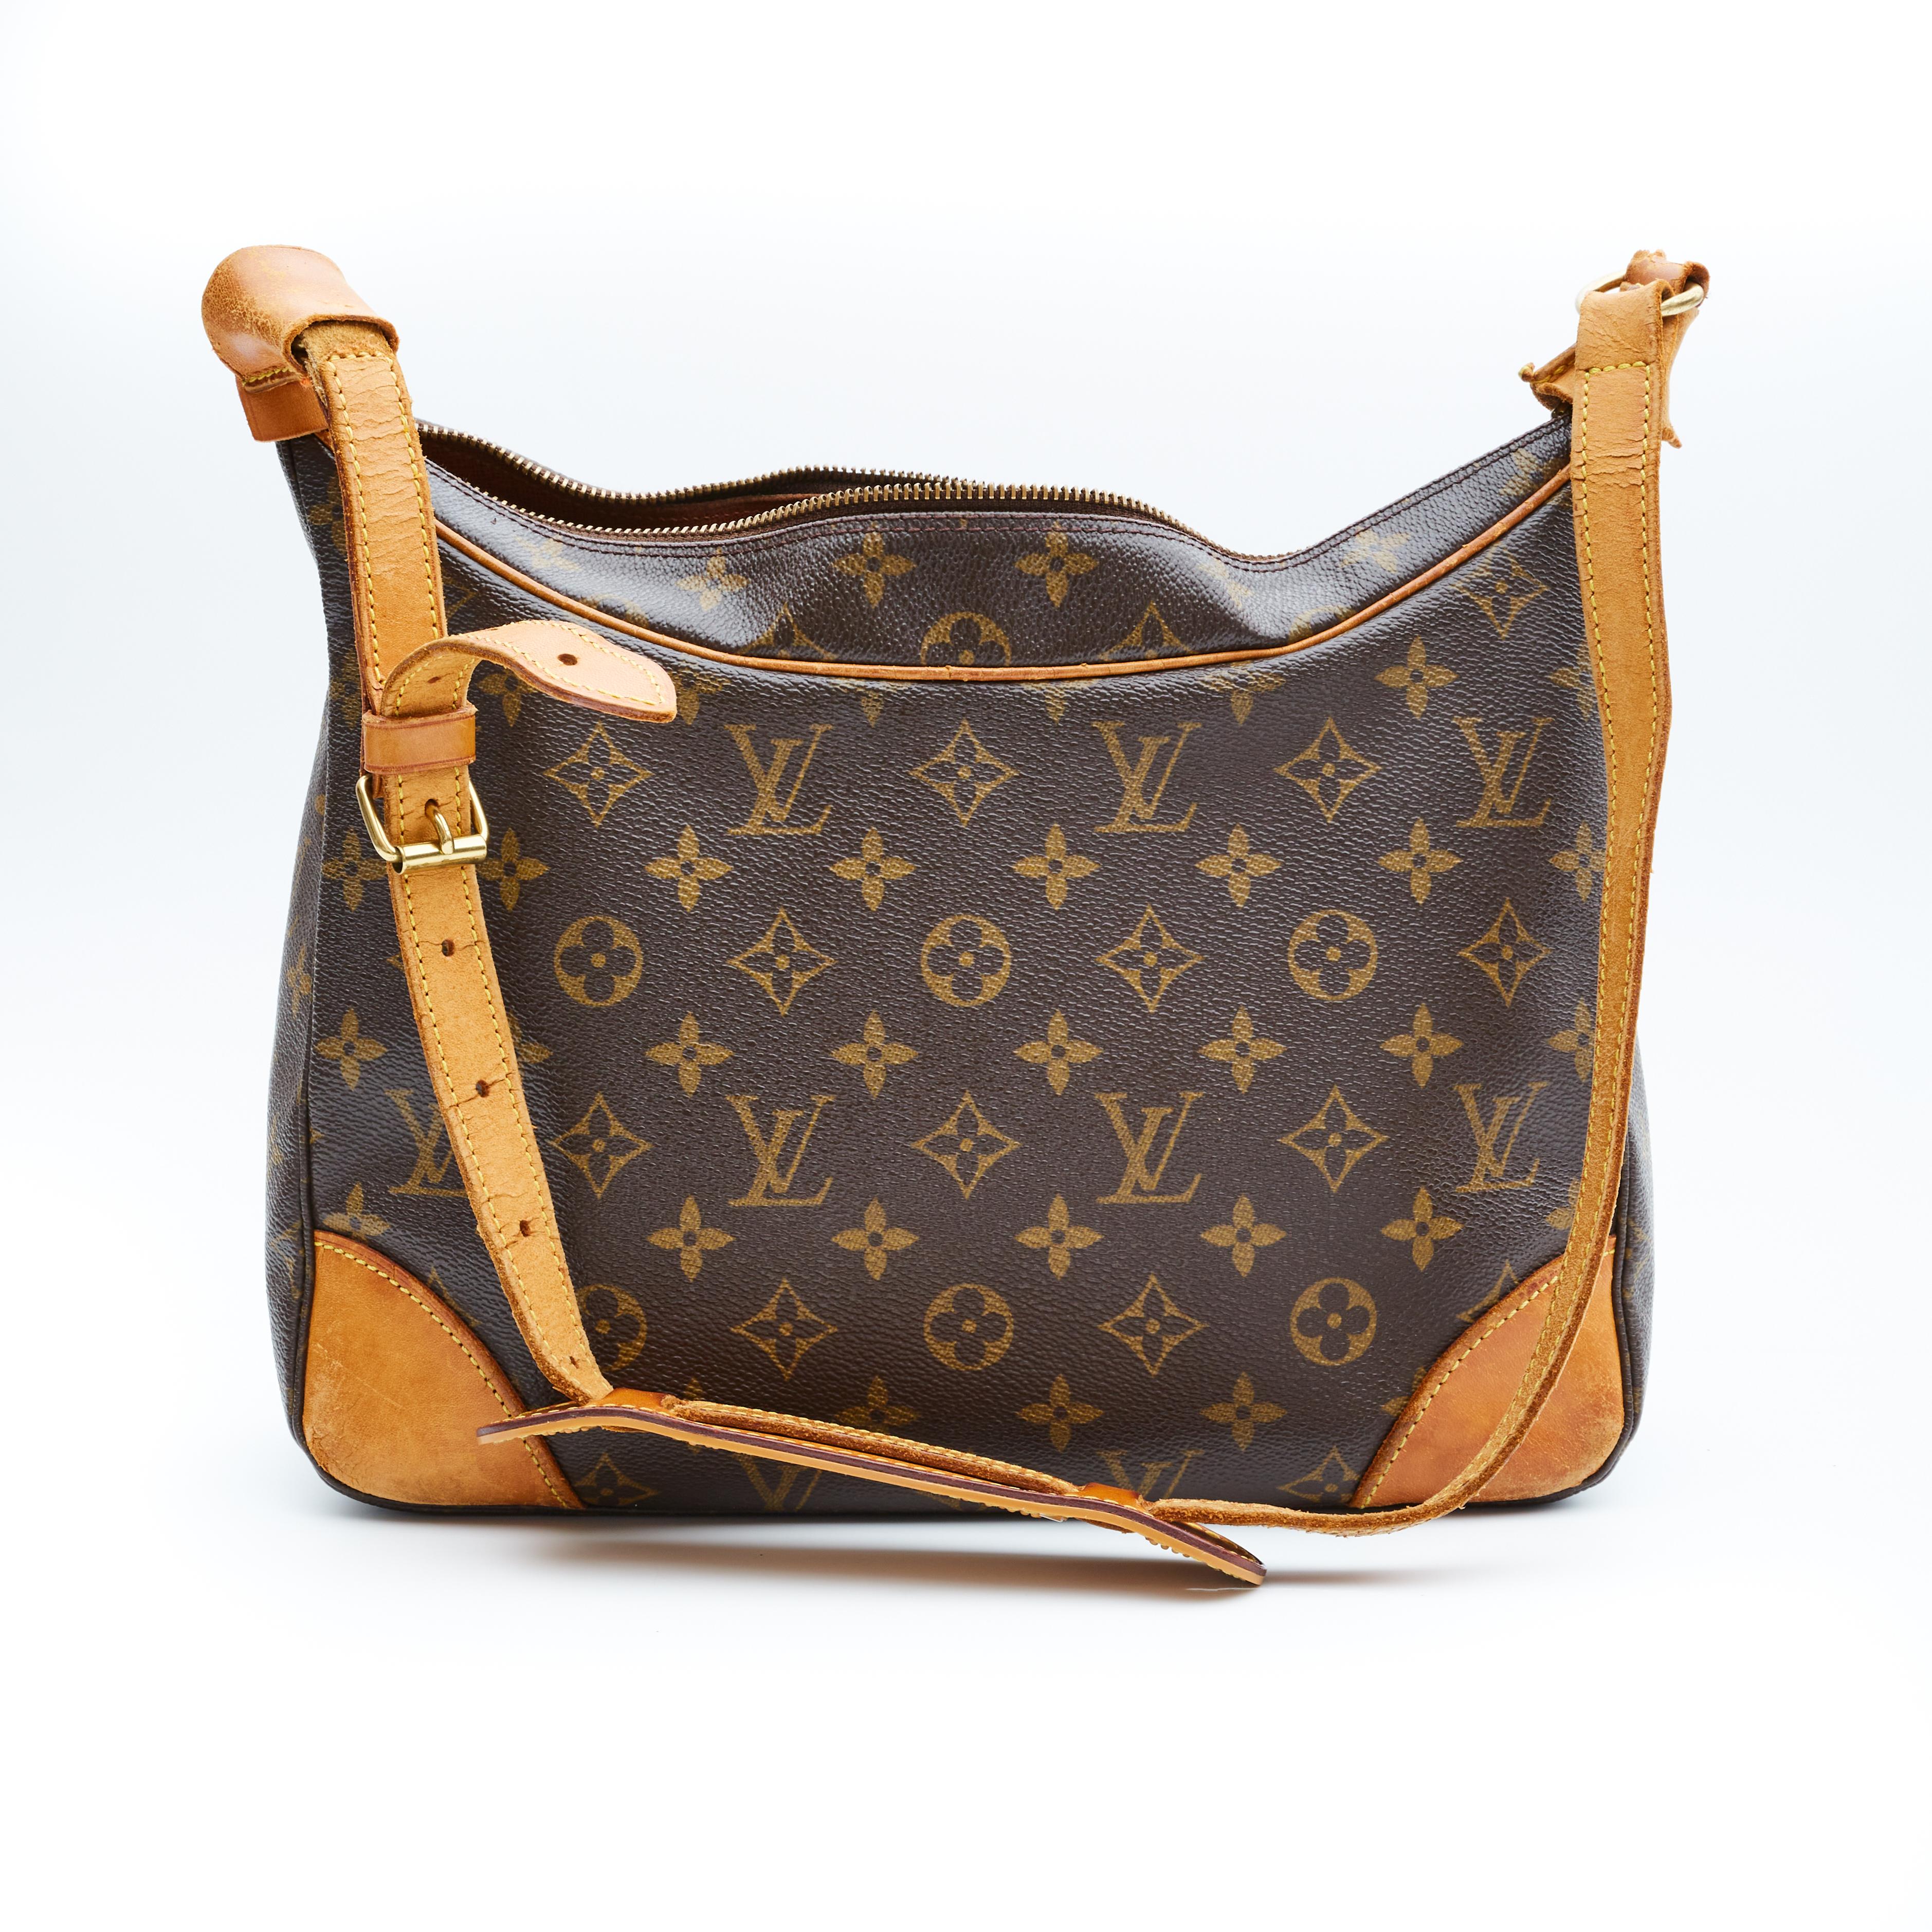 This shoulder bag is made with brown monogram on toile canvas with aged vachetta cowhide leather on the shoulder strap, base corners and trim. The bag features brass hardware, top zip closure and terra-cotta cross grain leather interior lining with